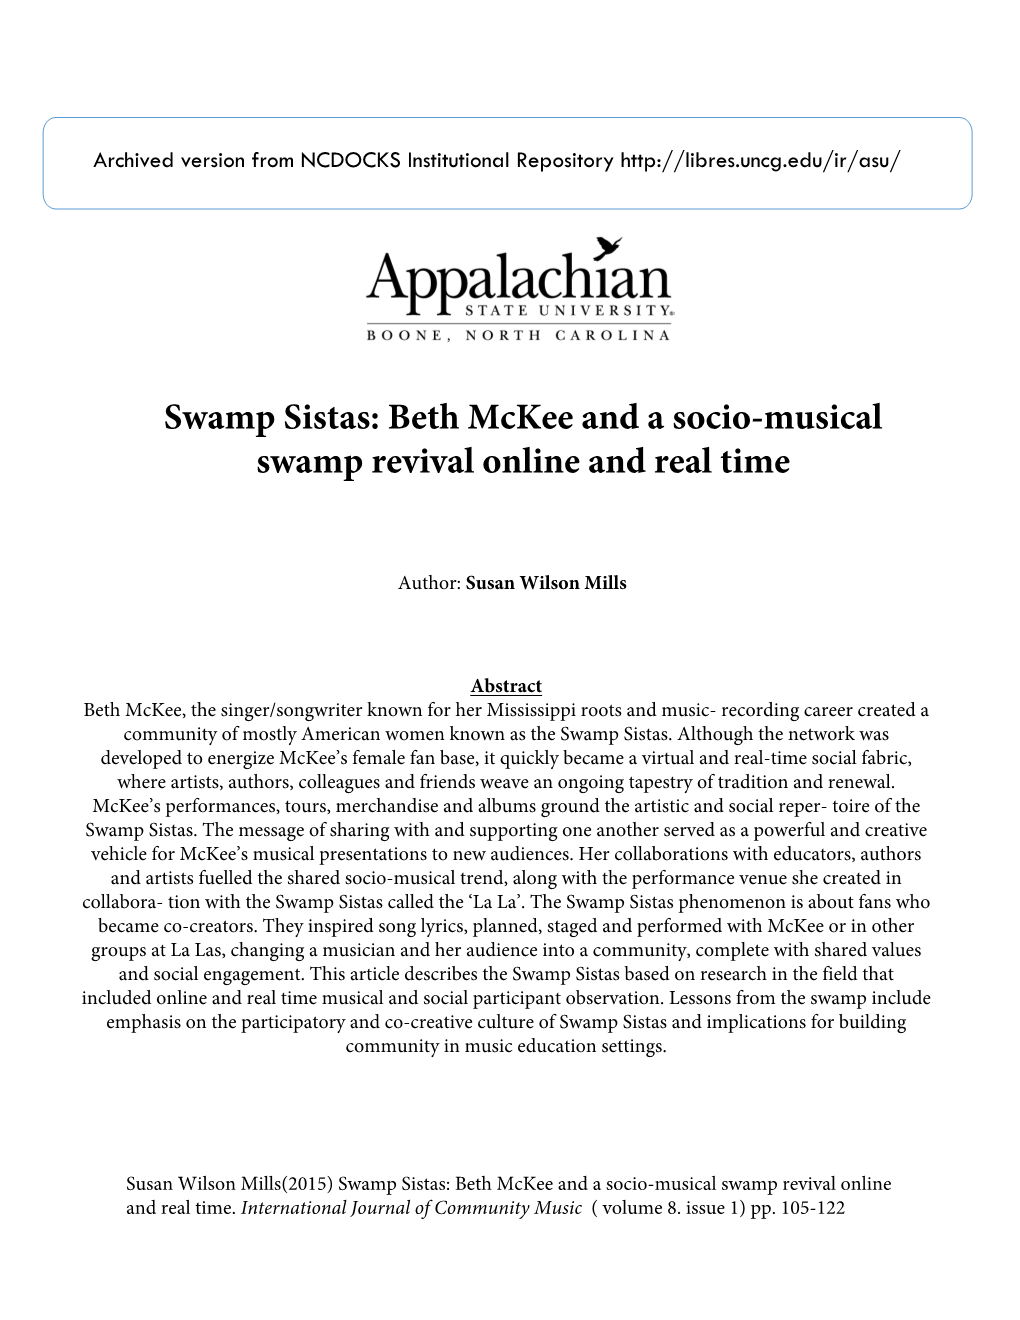 Swamp Sistas: Beth Mckee and a Socio-Musical Swamp Revival Online and Real Time